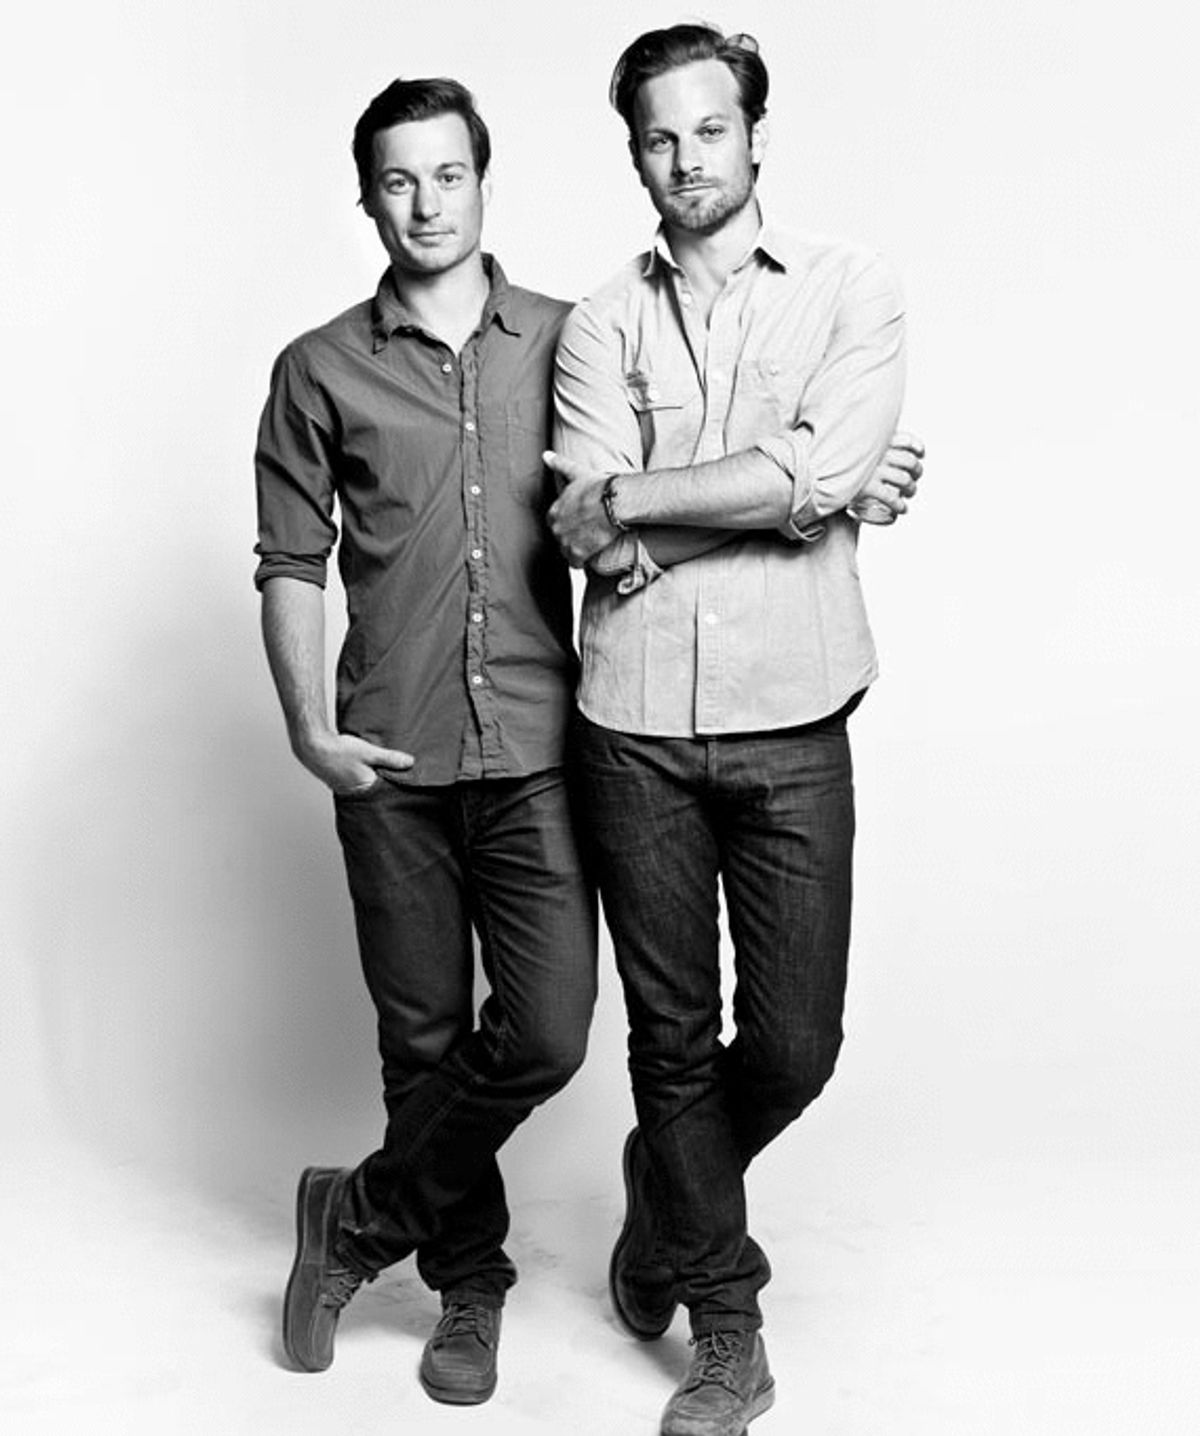 Hot 30: Adam and Andrew Mariani of Scribe Winery